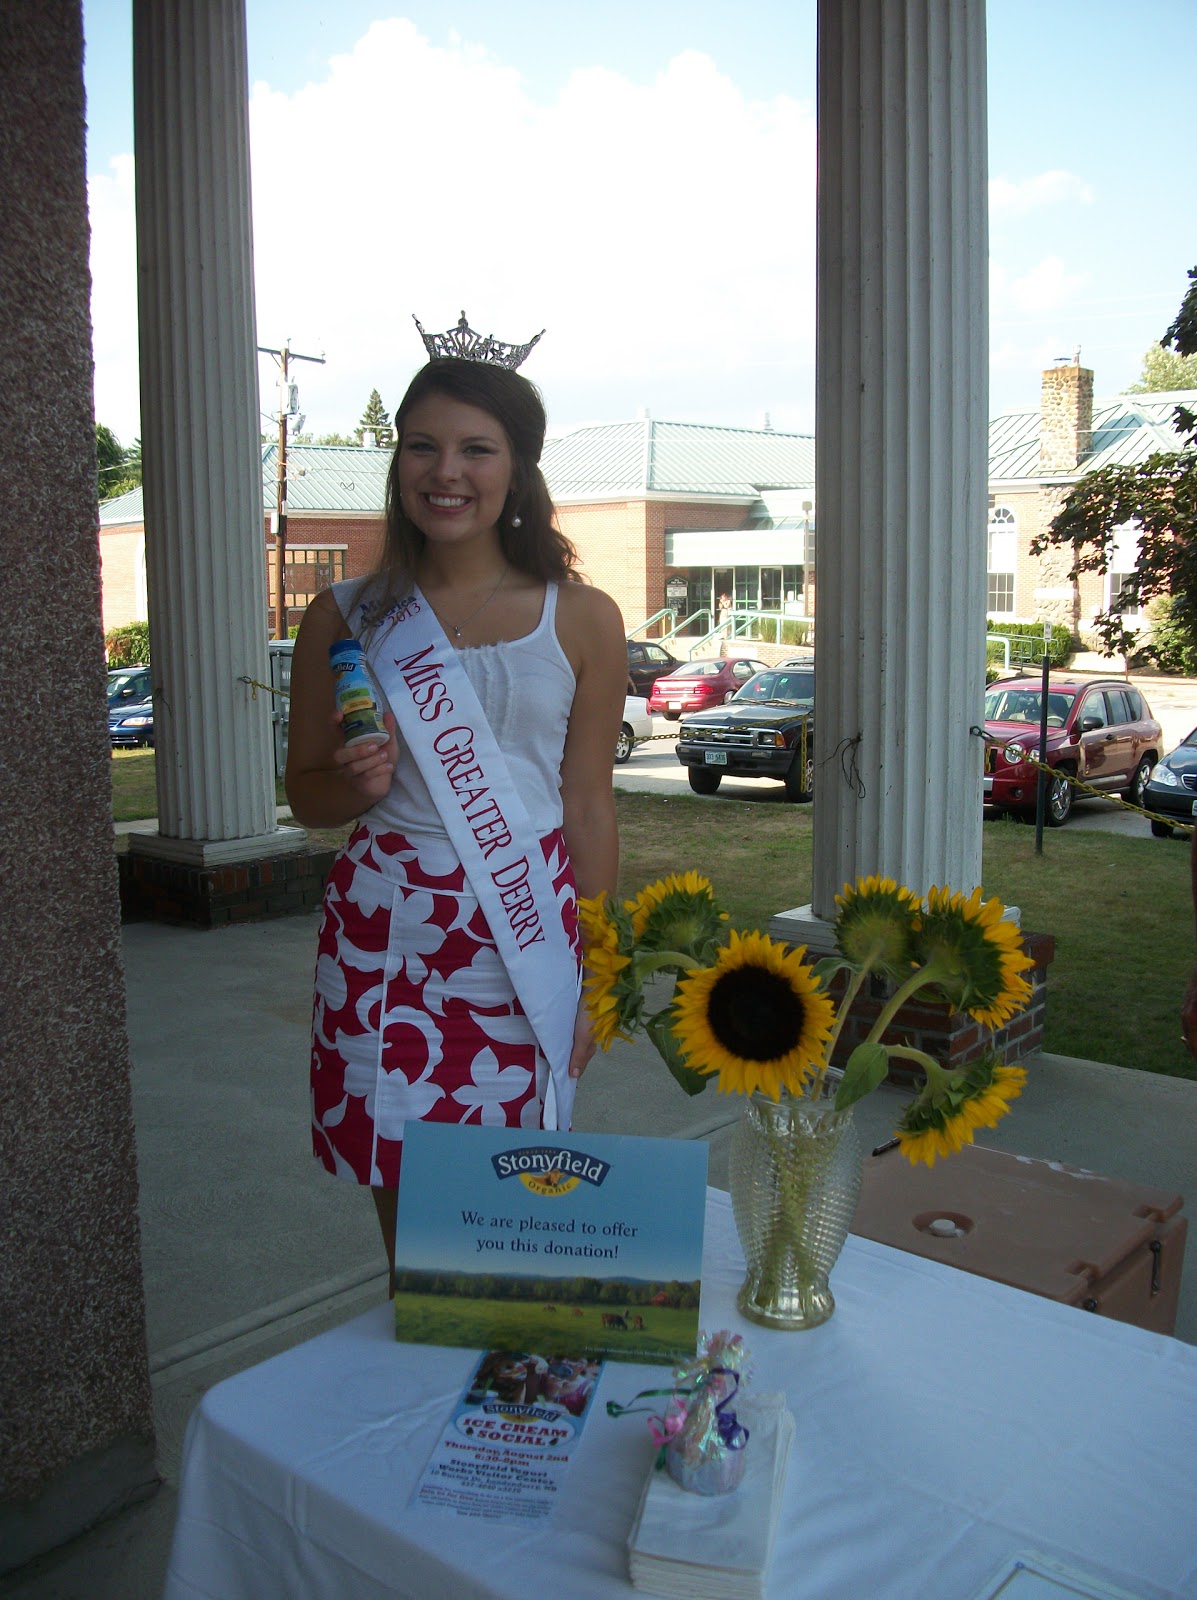 Miss Greater Derry 2013: Community Caregivers, MNHOT Trunk Show ...